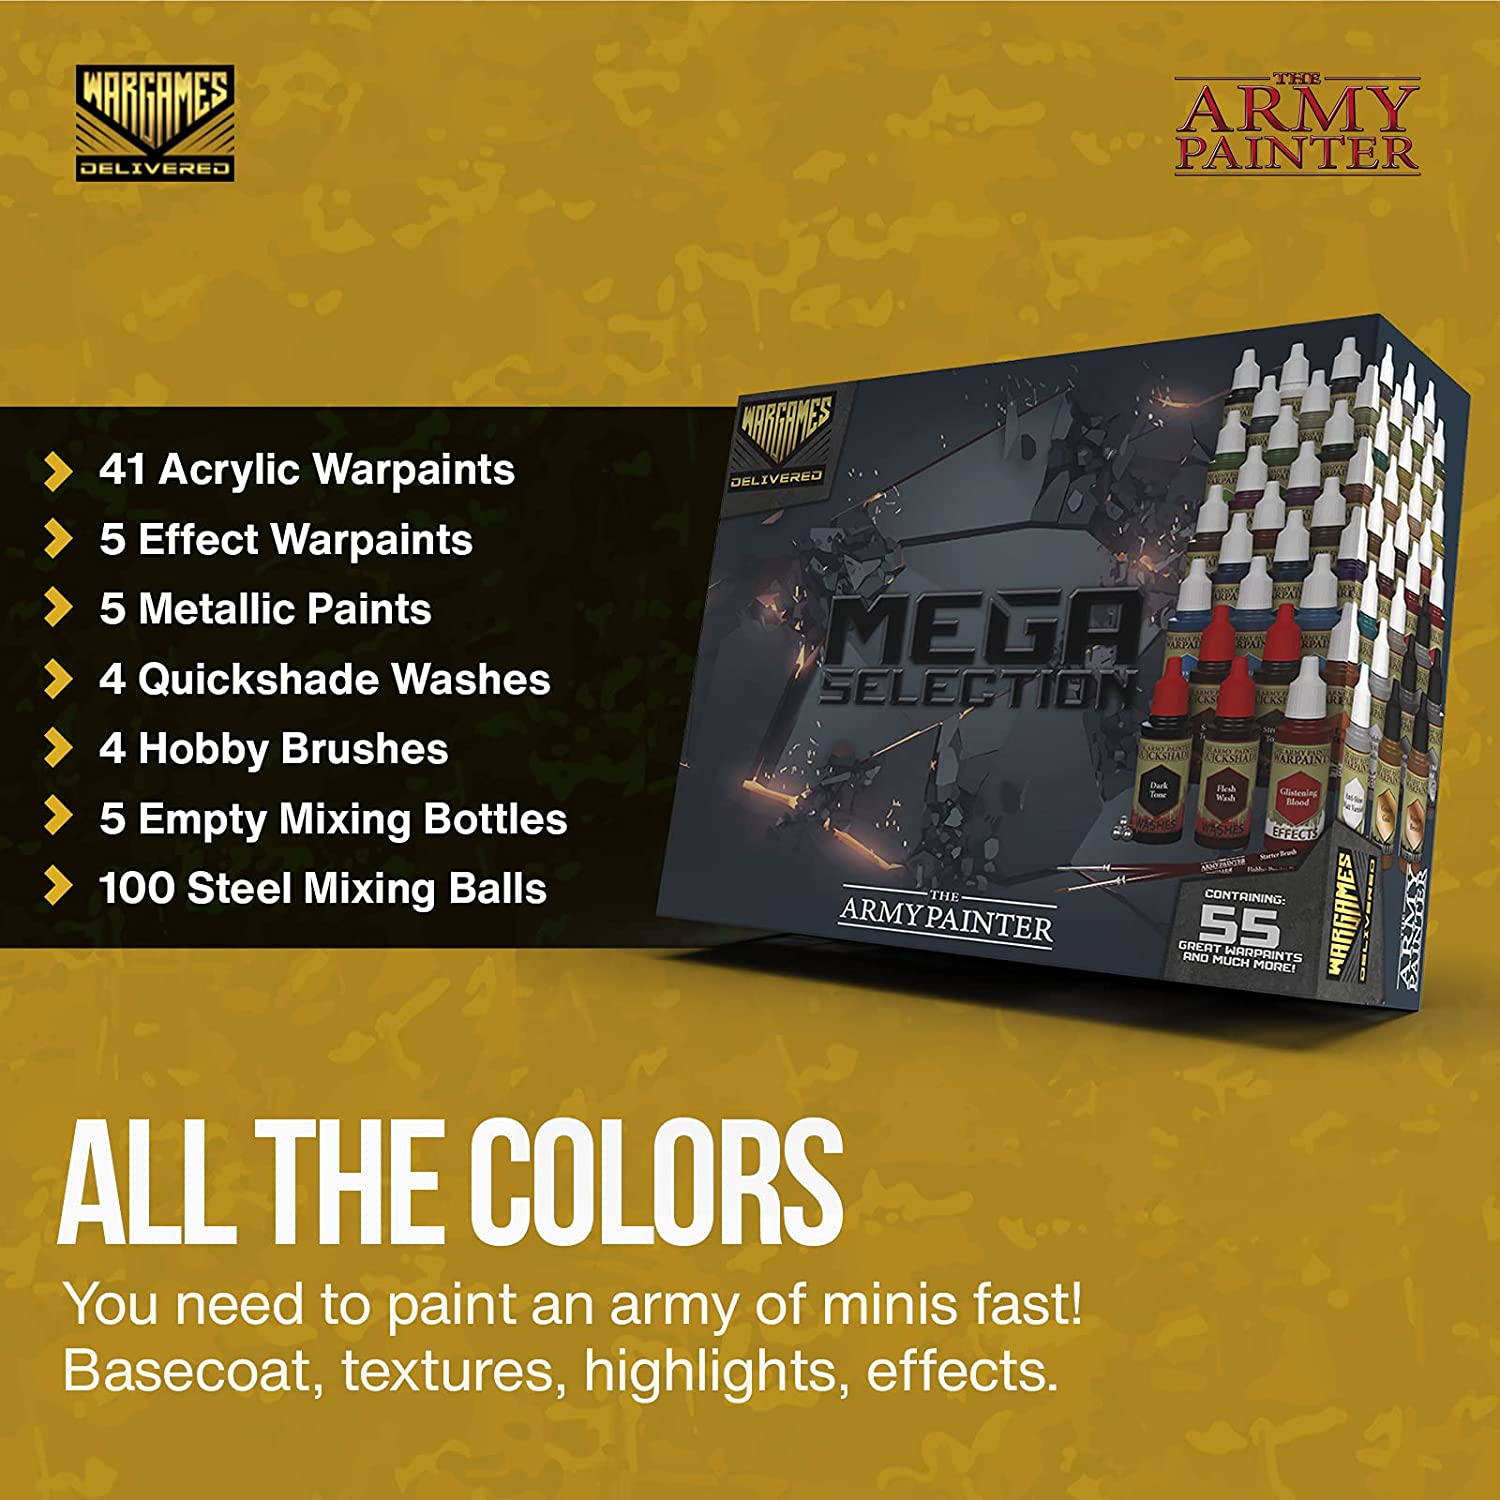 The Army Painter Miniature Painting Kit - Mega Paint set with 60 Nontoxic  Acrylic Paints and 100 Rustproof Mixing Balls, and 2 Part Modeling Clay